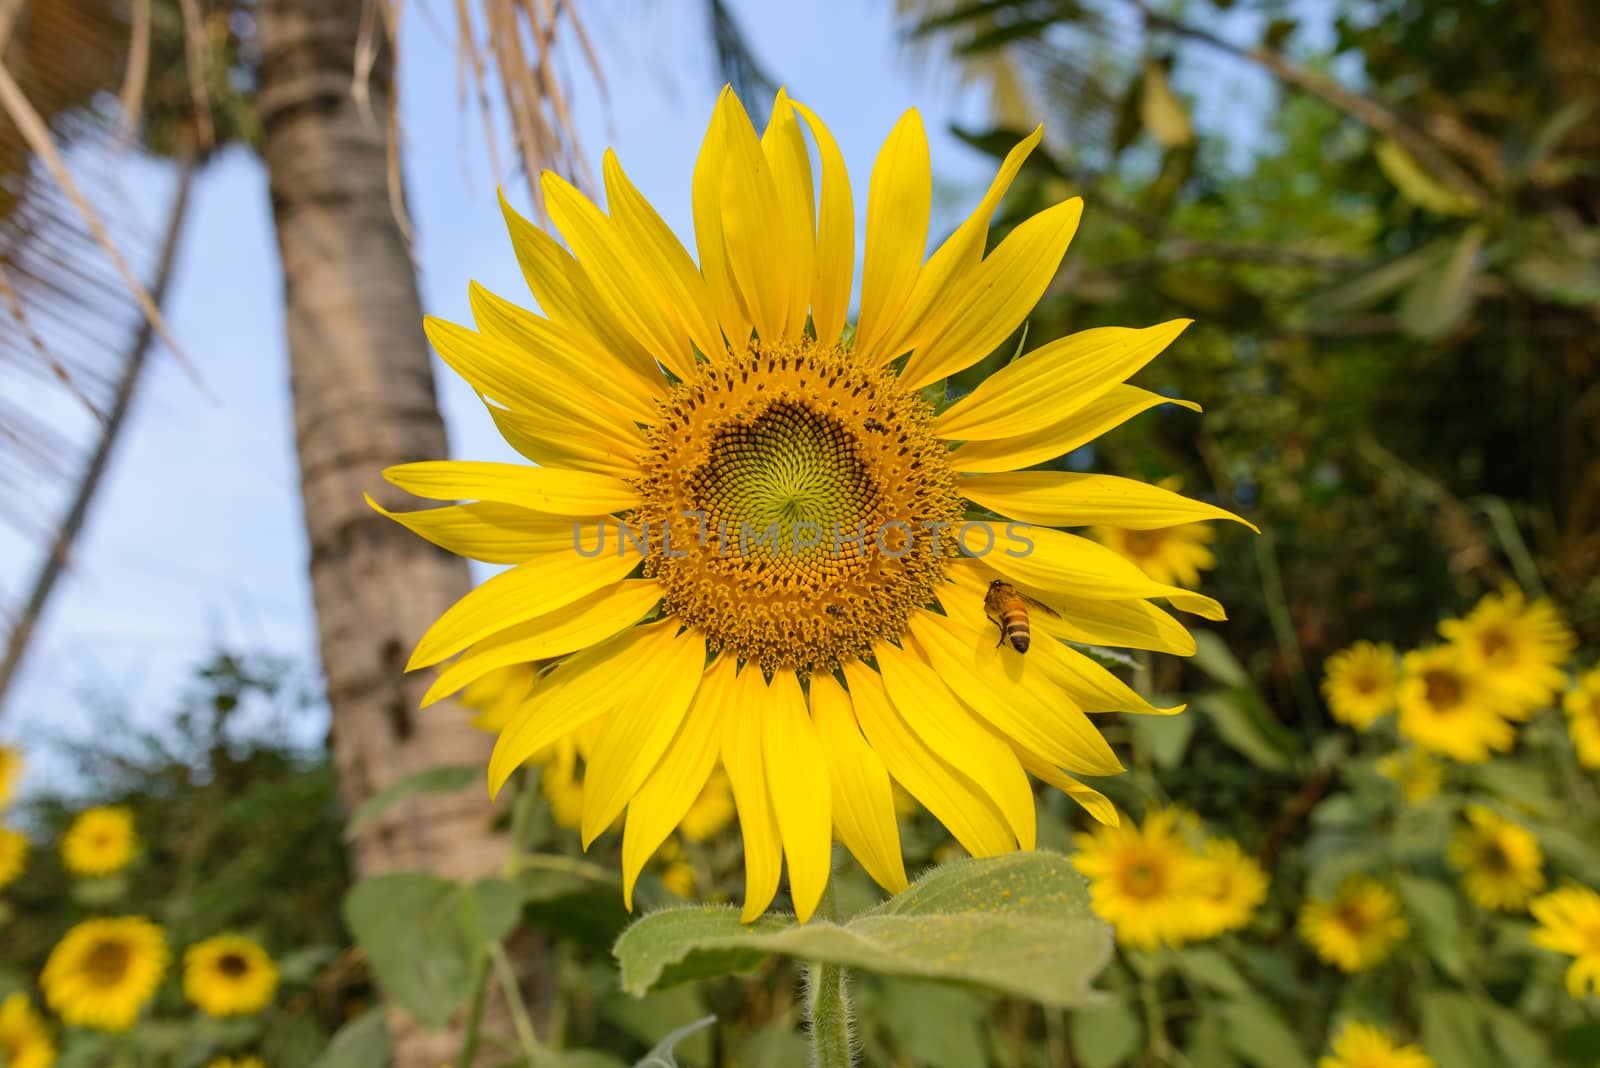 A colorful Sunflower shot at the field